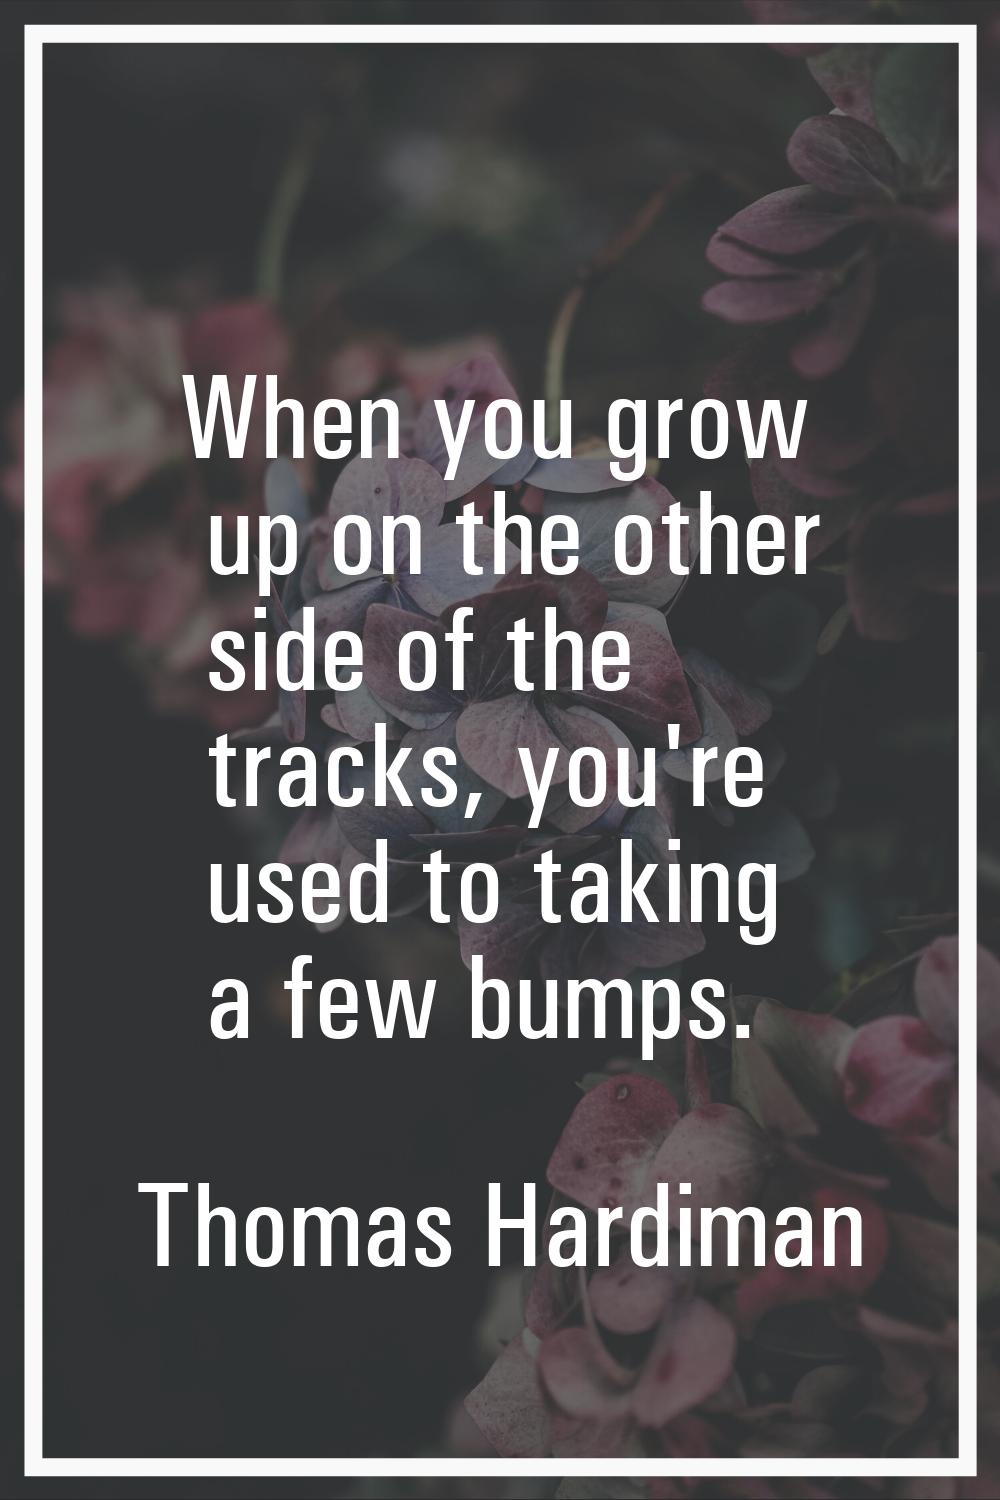 When you grow up on the other side of the tracks, you're used to taking a few bumps.